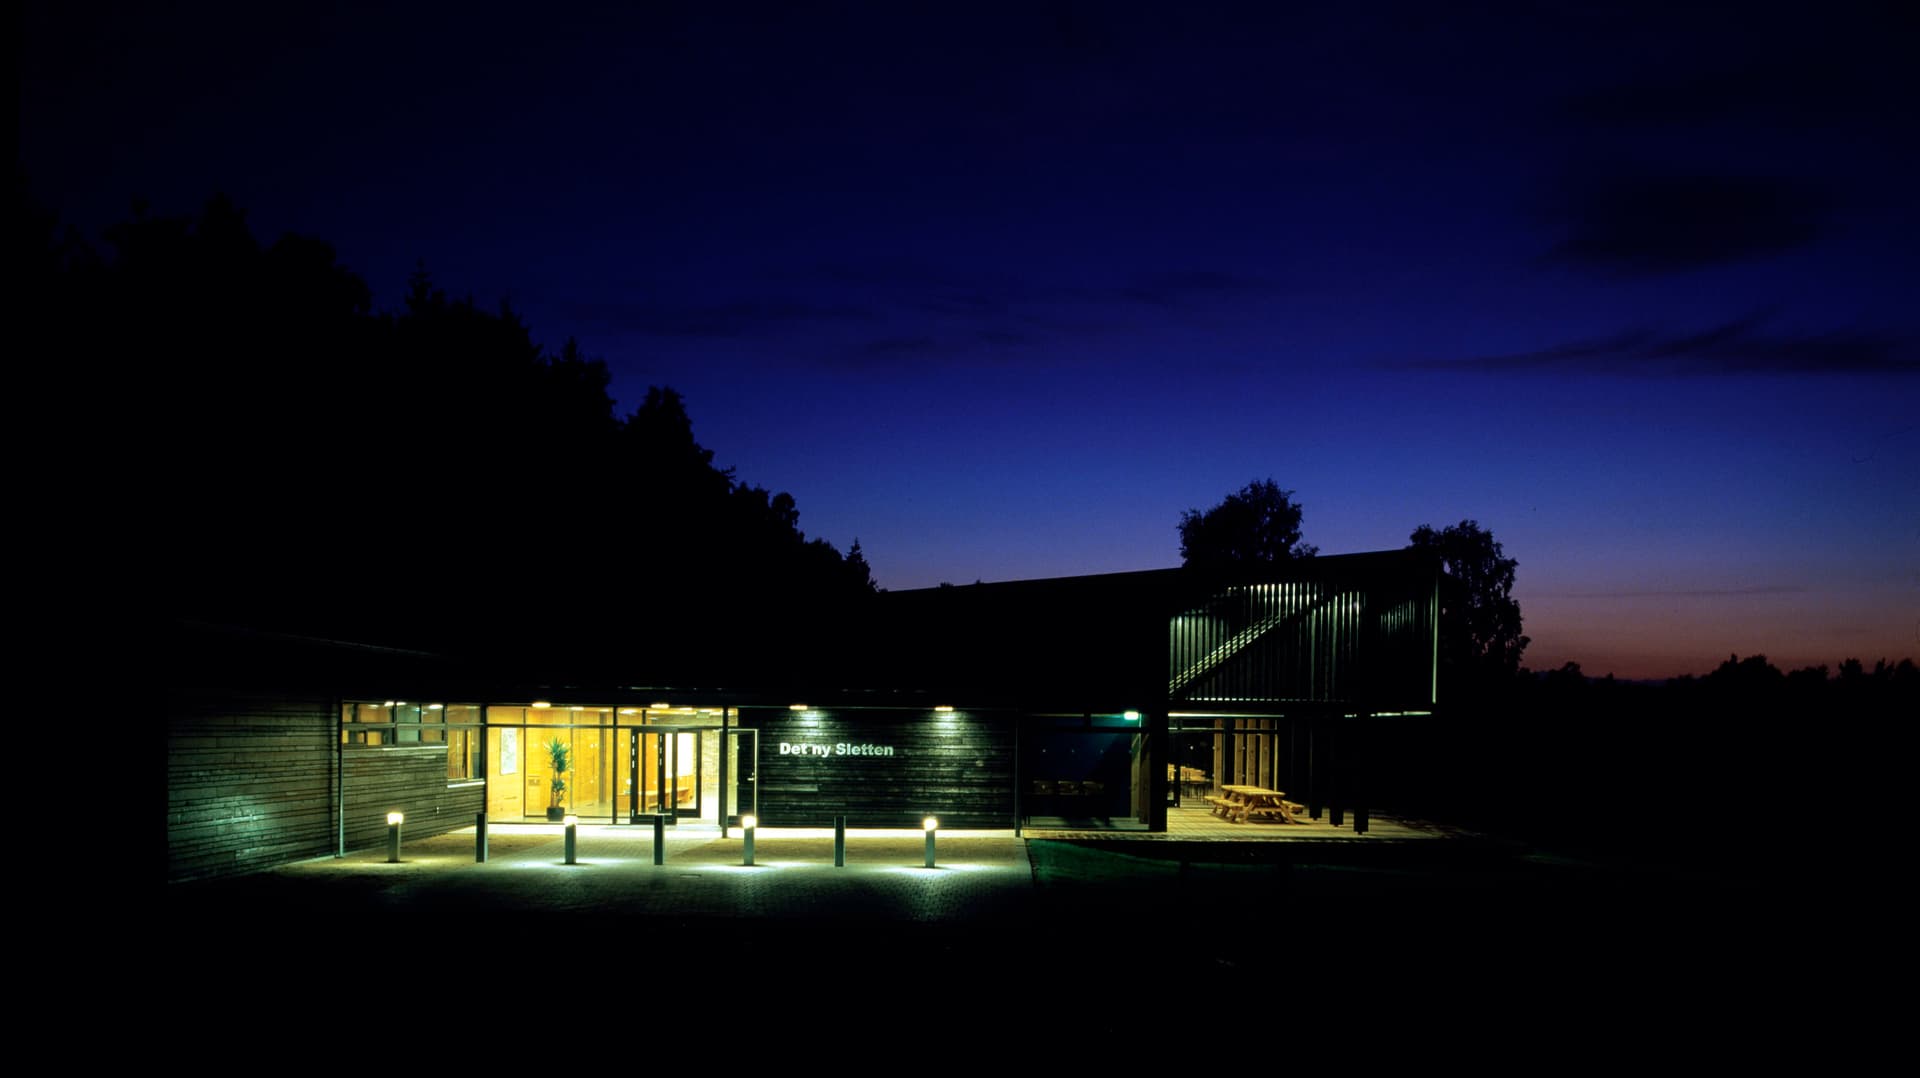 The outdoor centre glows up the night sky.